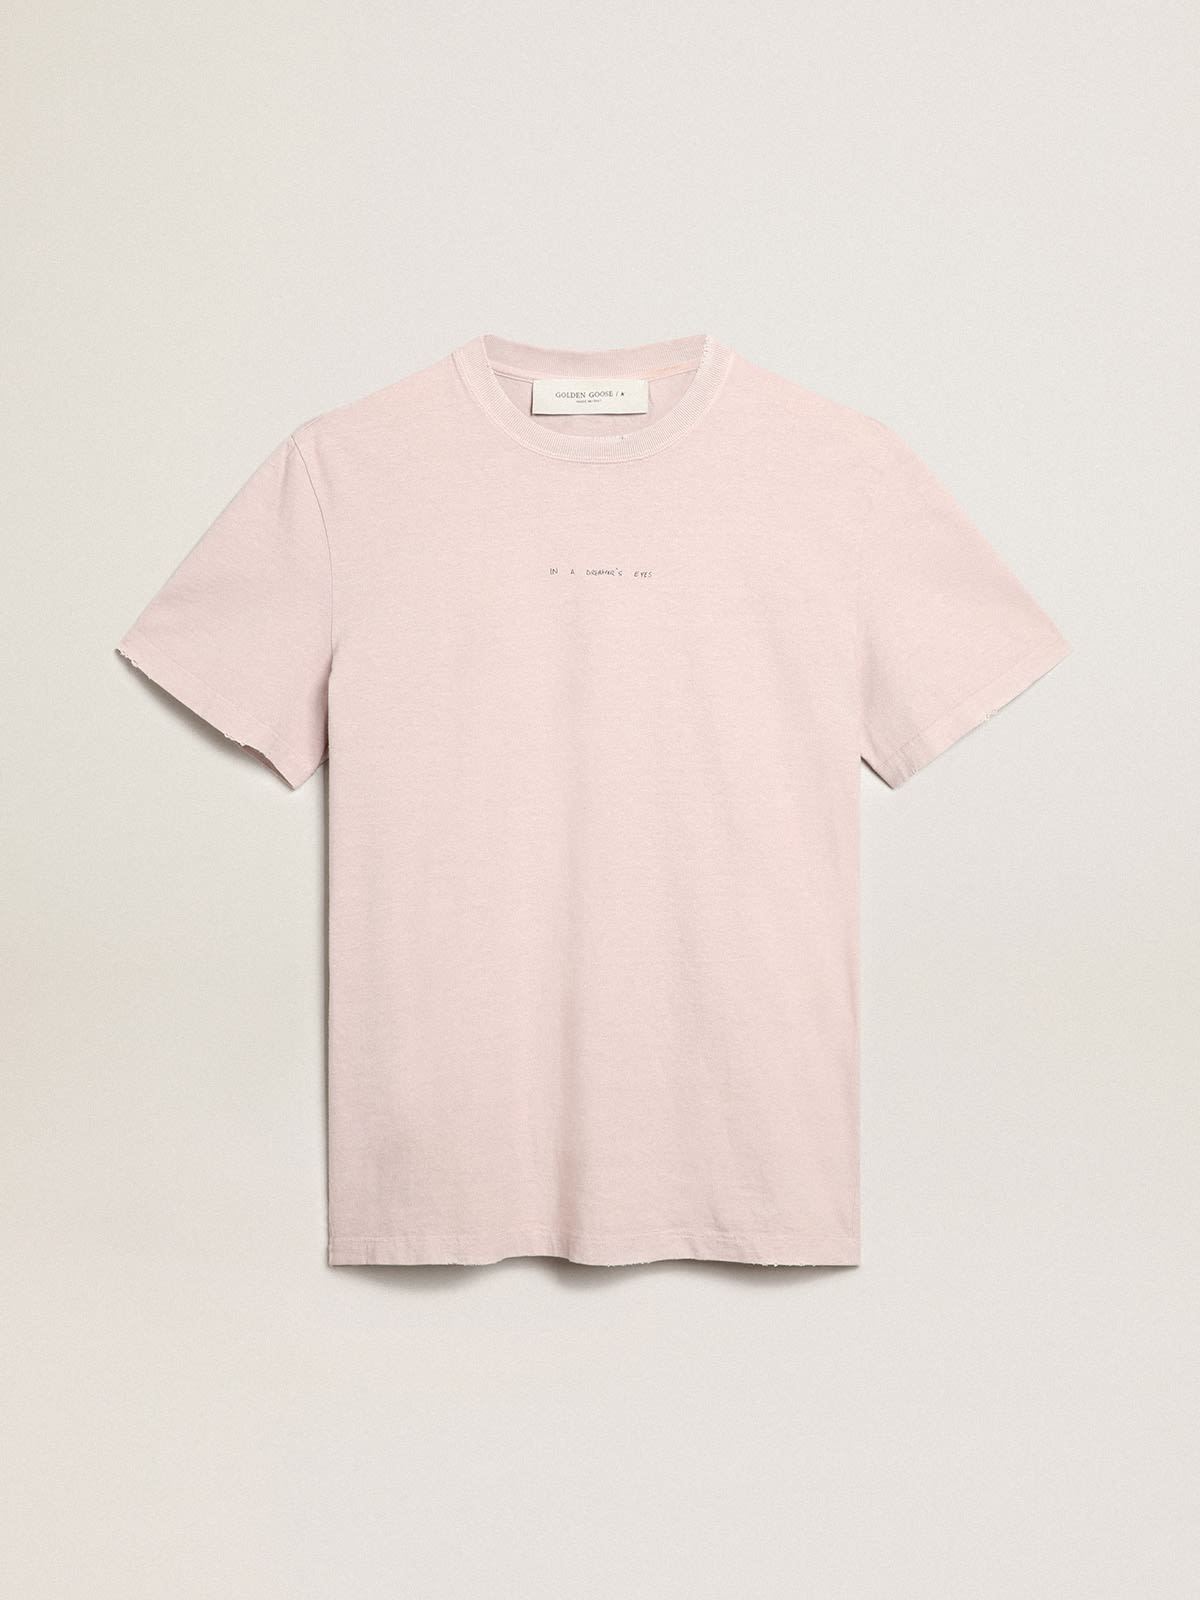 Golden Goose - Pale pink men’s T-shirt with lettering in the center in 